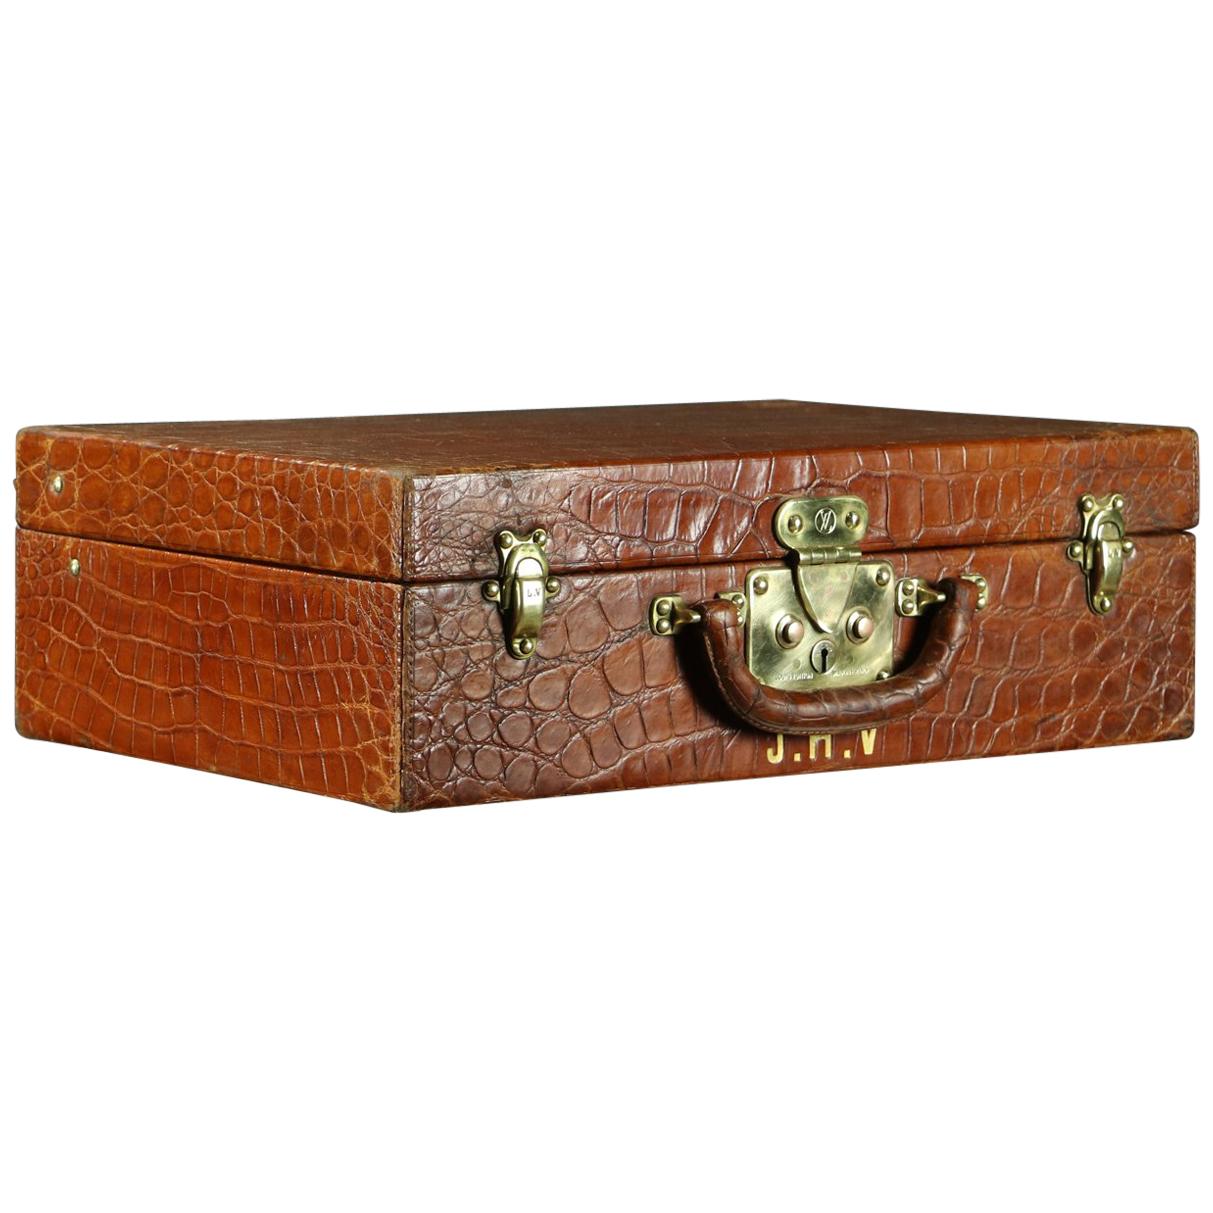 Personal Suitcase of Josette Henry-Vuitton, wife of Henry-Louis Vuitton For Sale